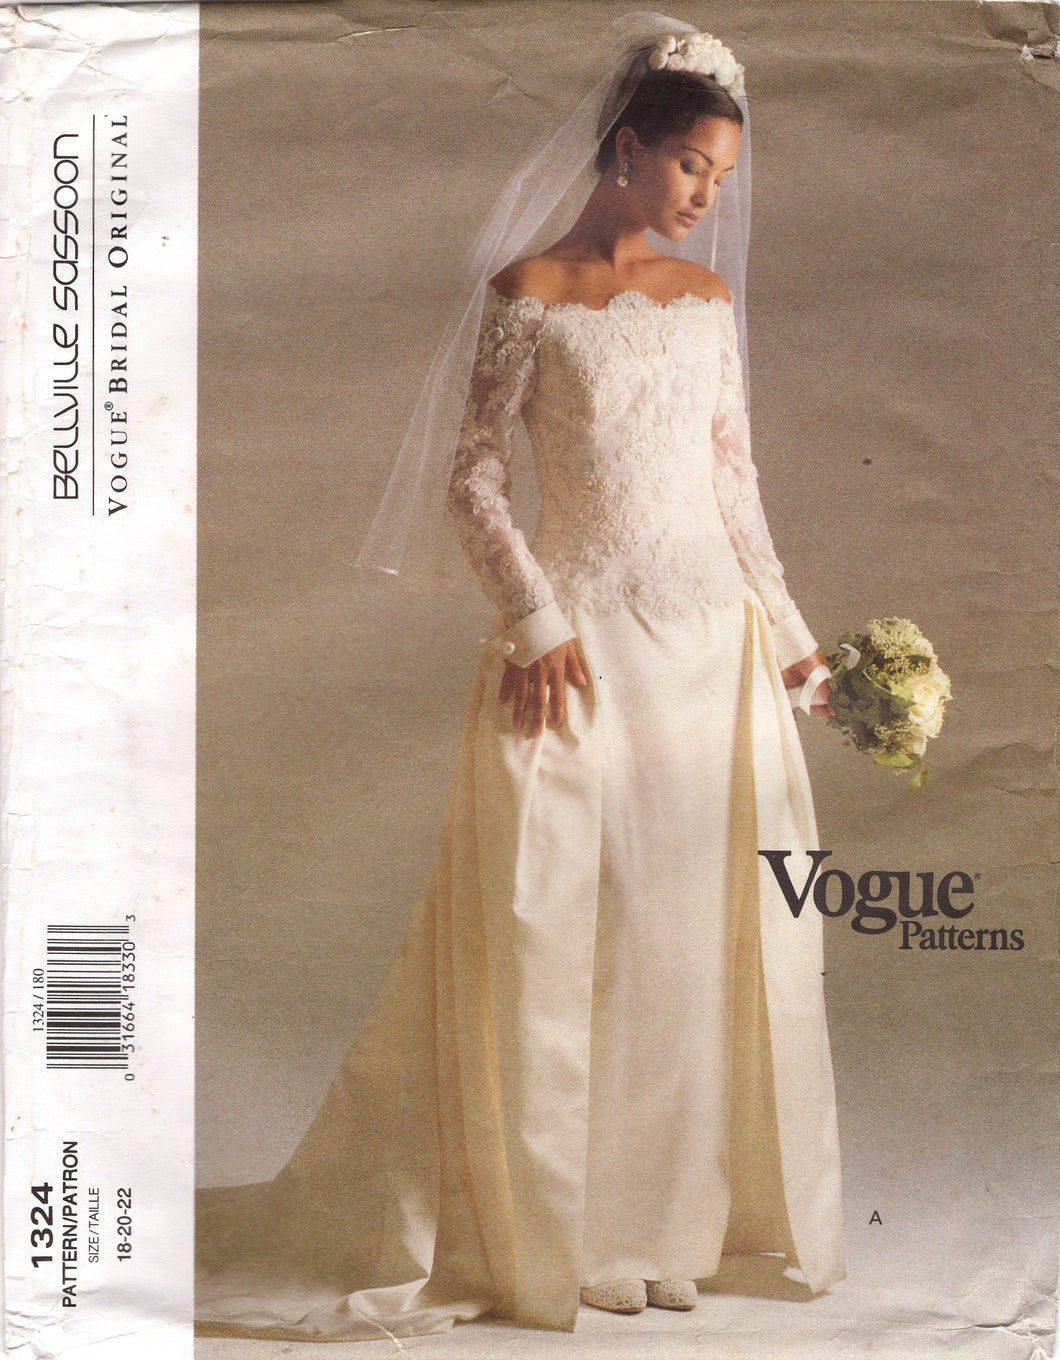 1990's Vogue Bridal by Bellville Sassoon Sheath Wedding Dress Pattern with or without train - Bust 40-42-44